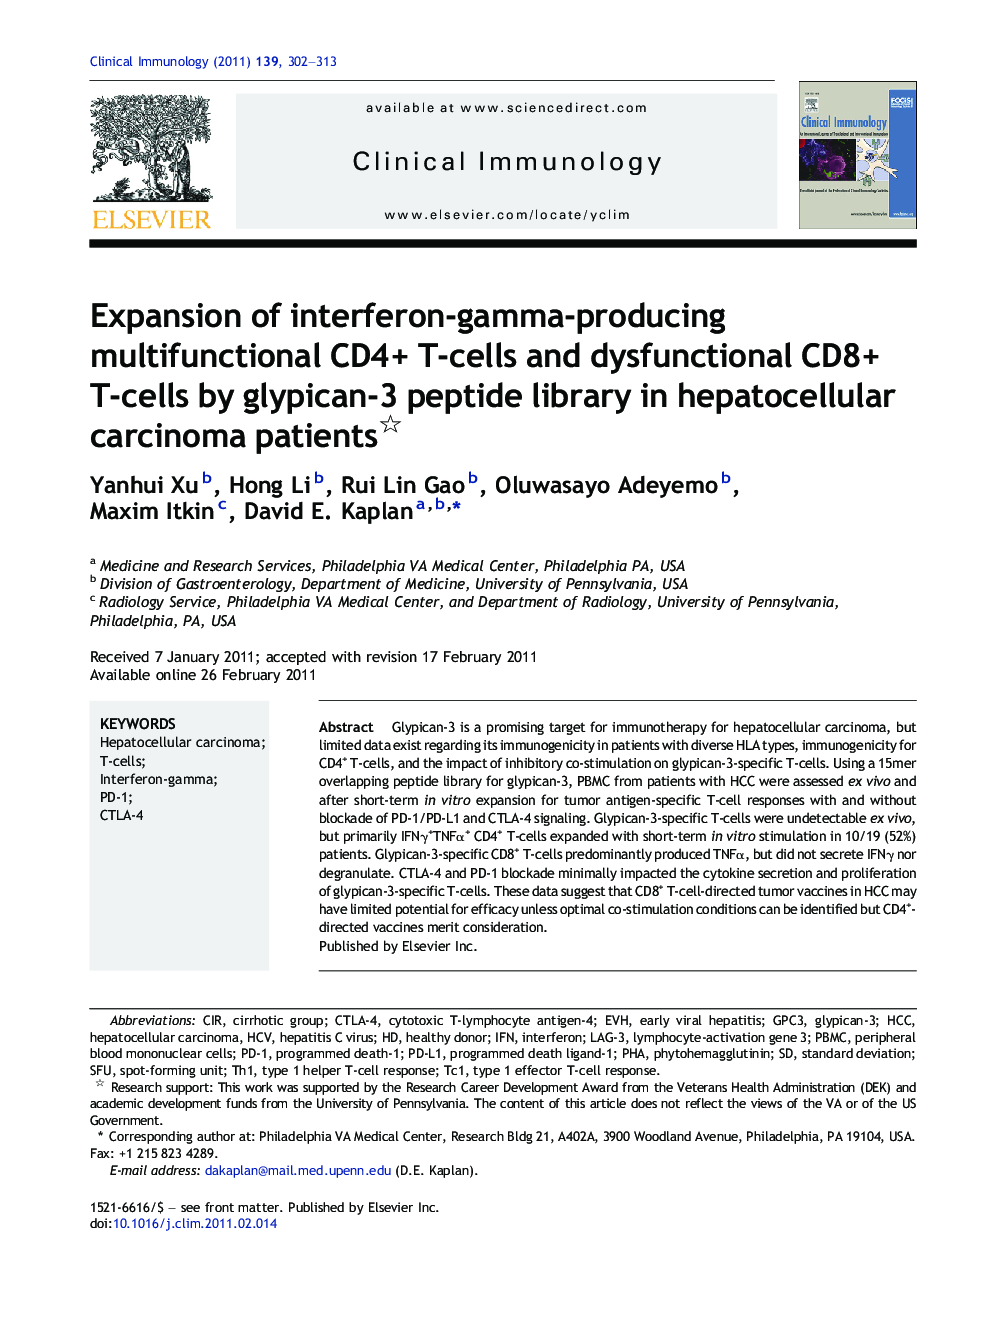 Expansion of interferon-gamma-producing multifunctional CD4+ T-cells and dysfunctional CD8+ T-cells by glypican-3 peptide library in hepatocellular carcinoma patients 